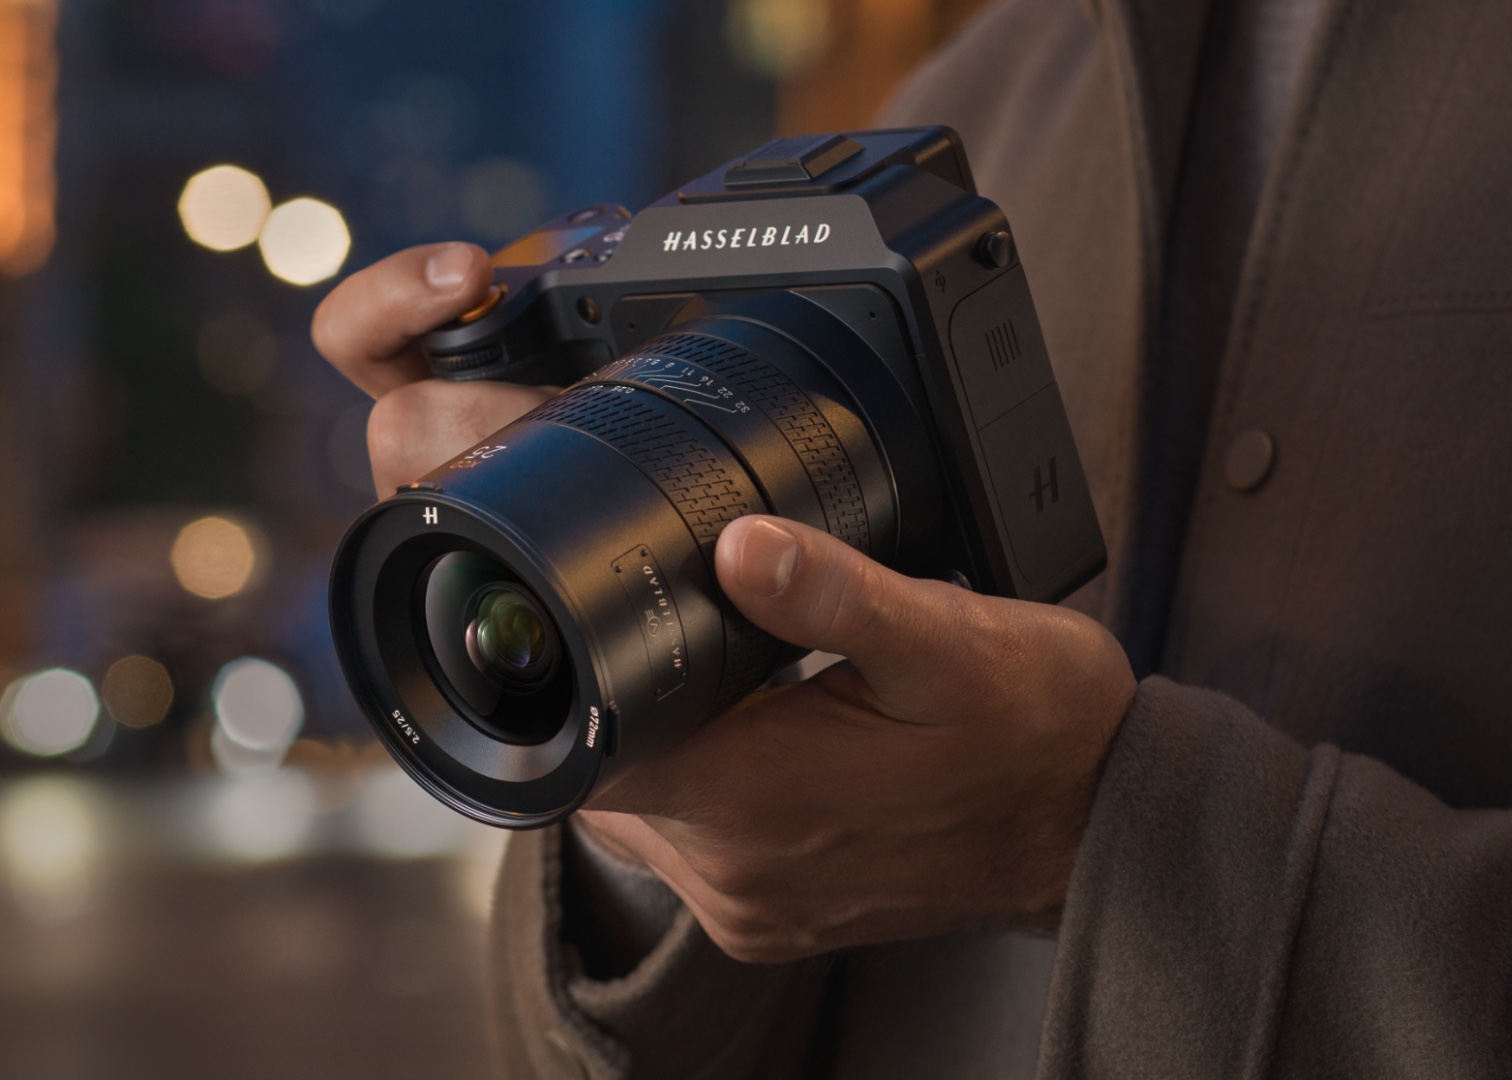 The new Hasselblad XCD 25mm f2.5 V lens